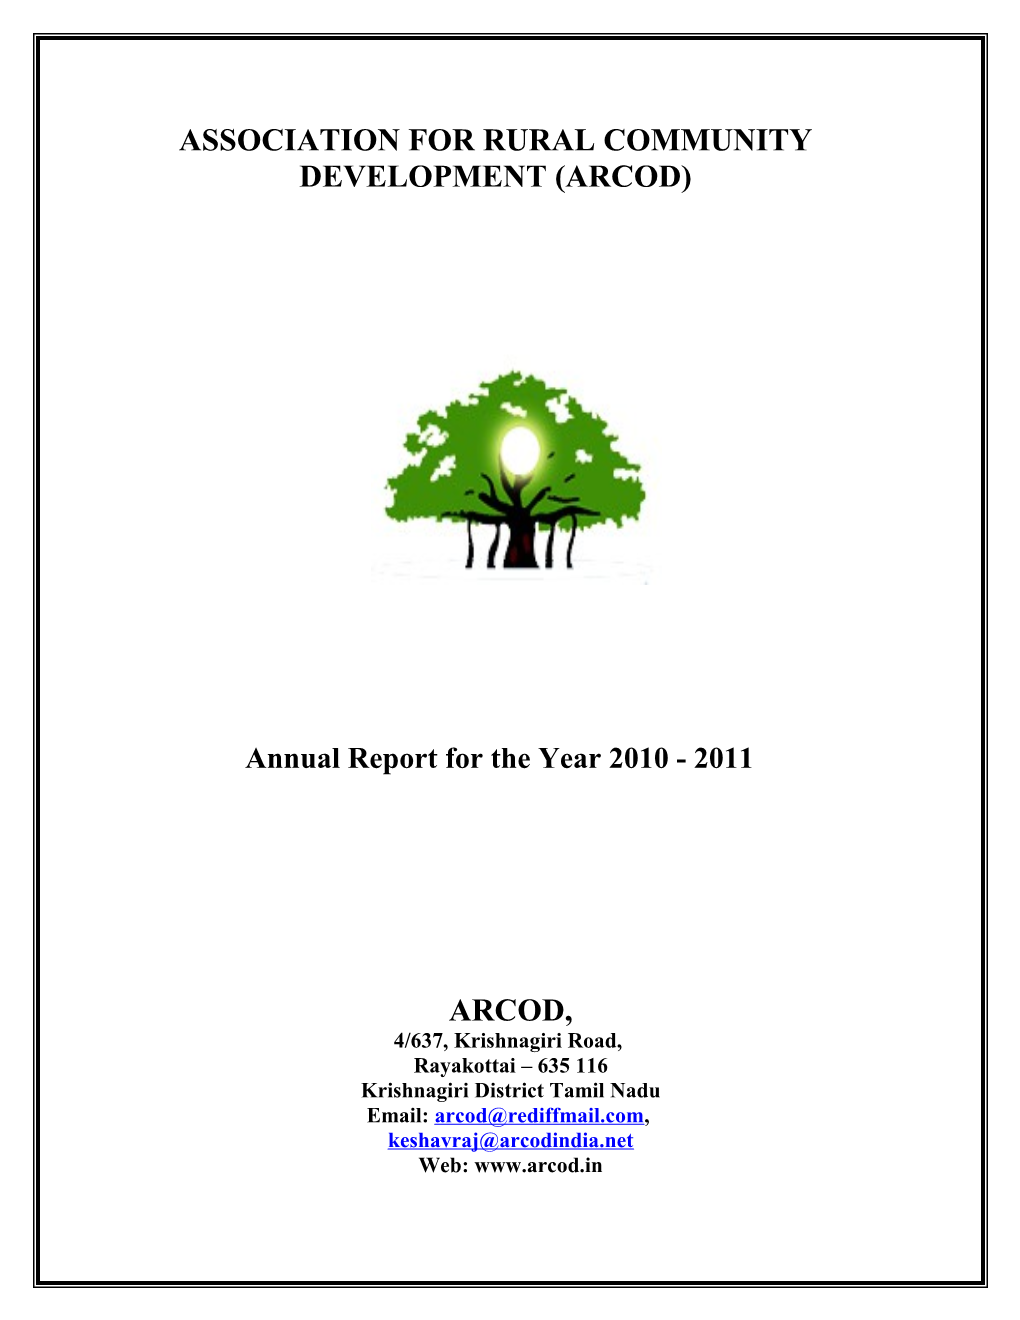 ARCOD Has Completed 23 Years of Service in Empowering the Rural People